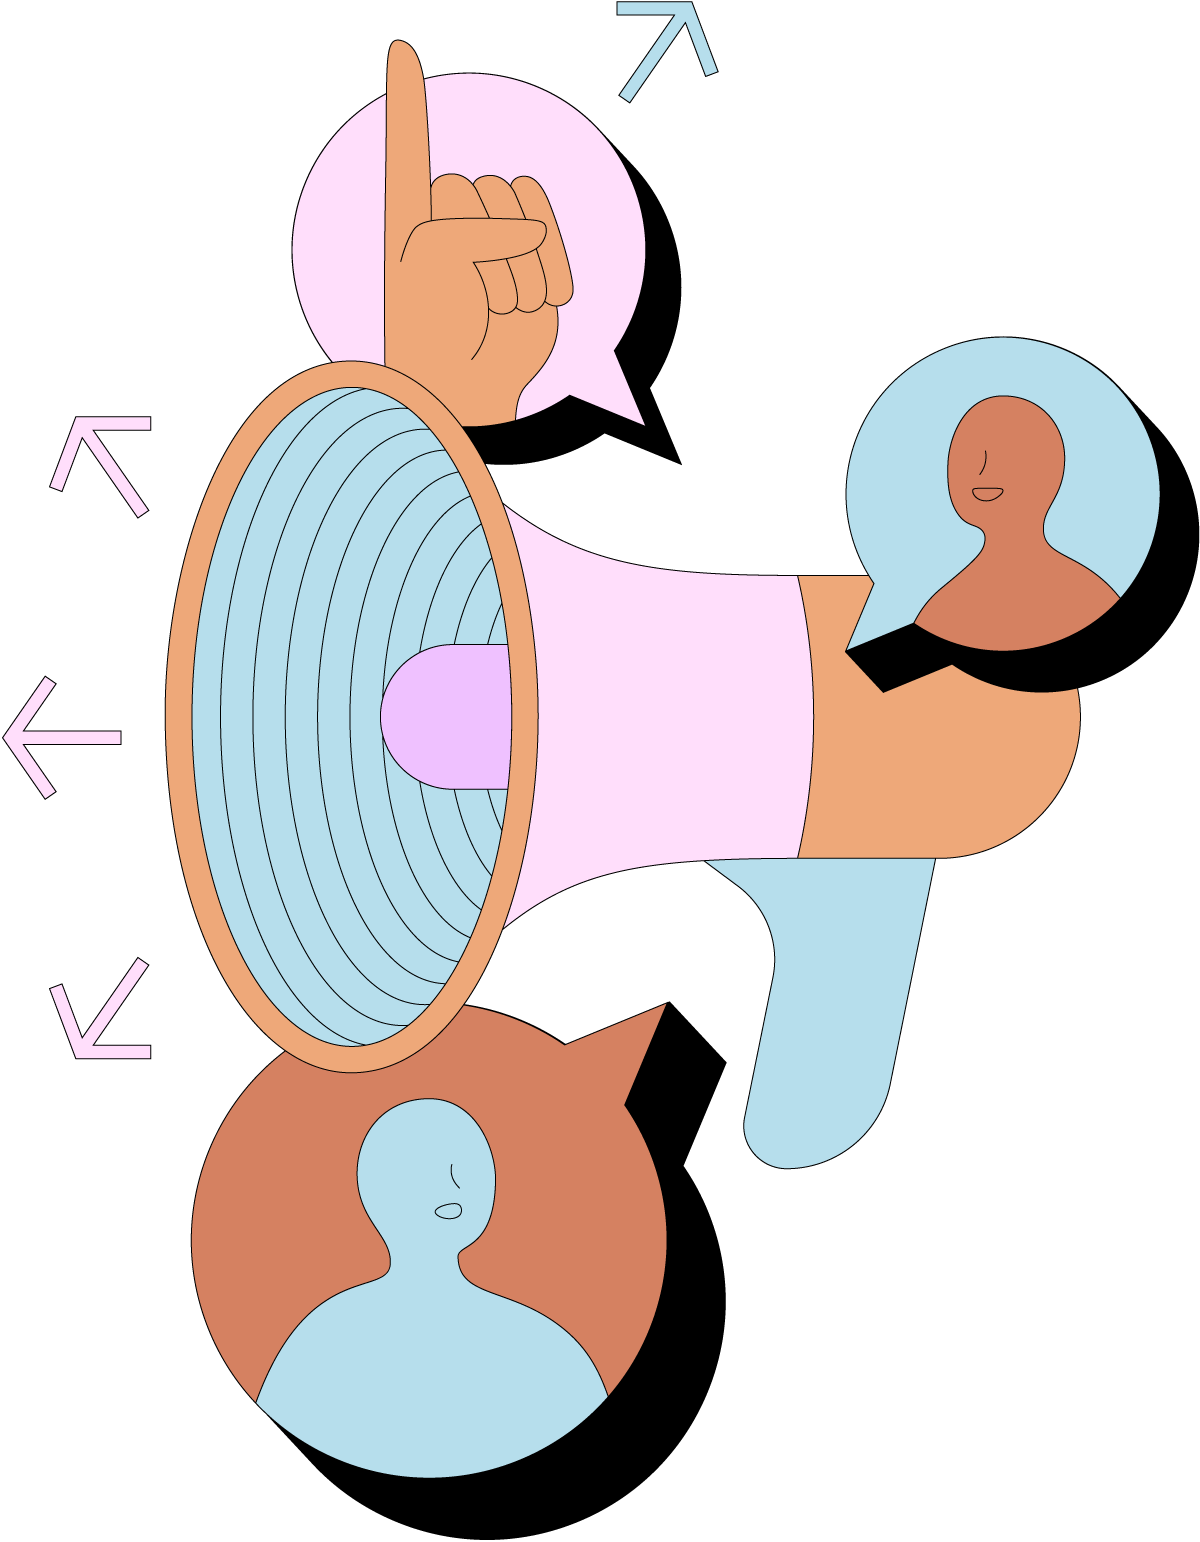 Cartoon graphic of three chat bubbles, two of which have the drawing of person and one that shows a finger pointing up. The middle of the cartoon depicts a megaphone.